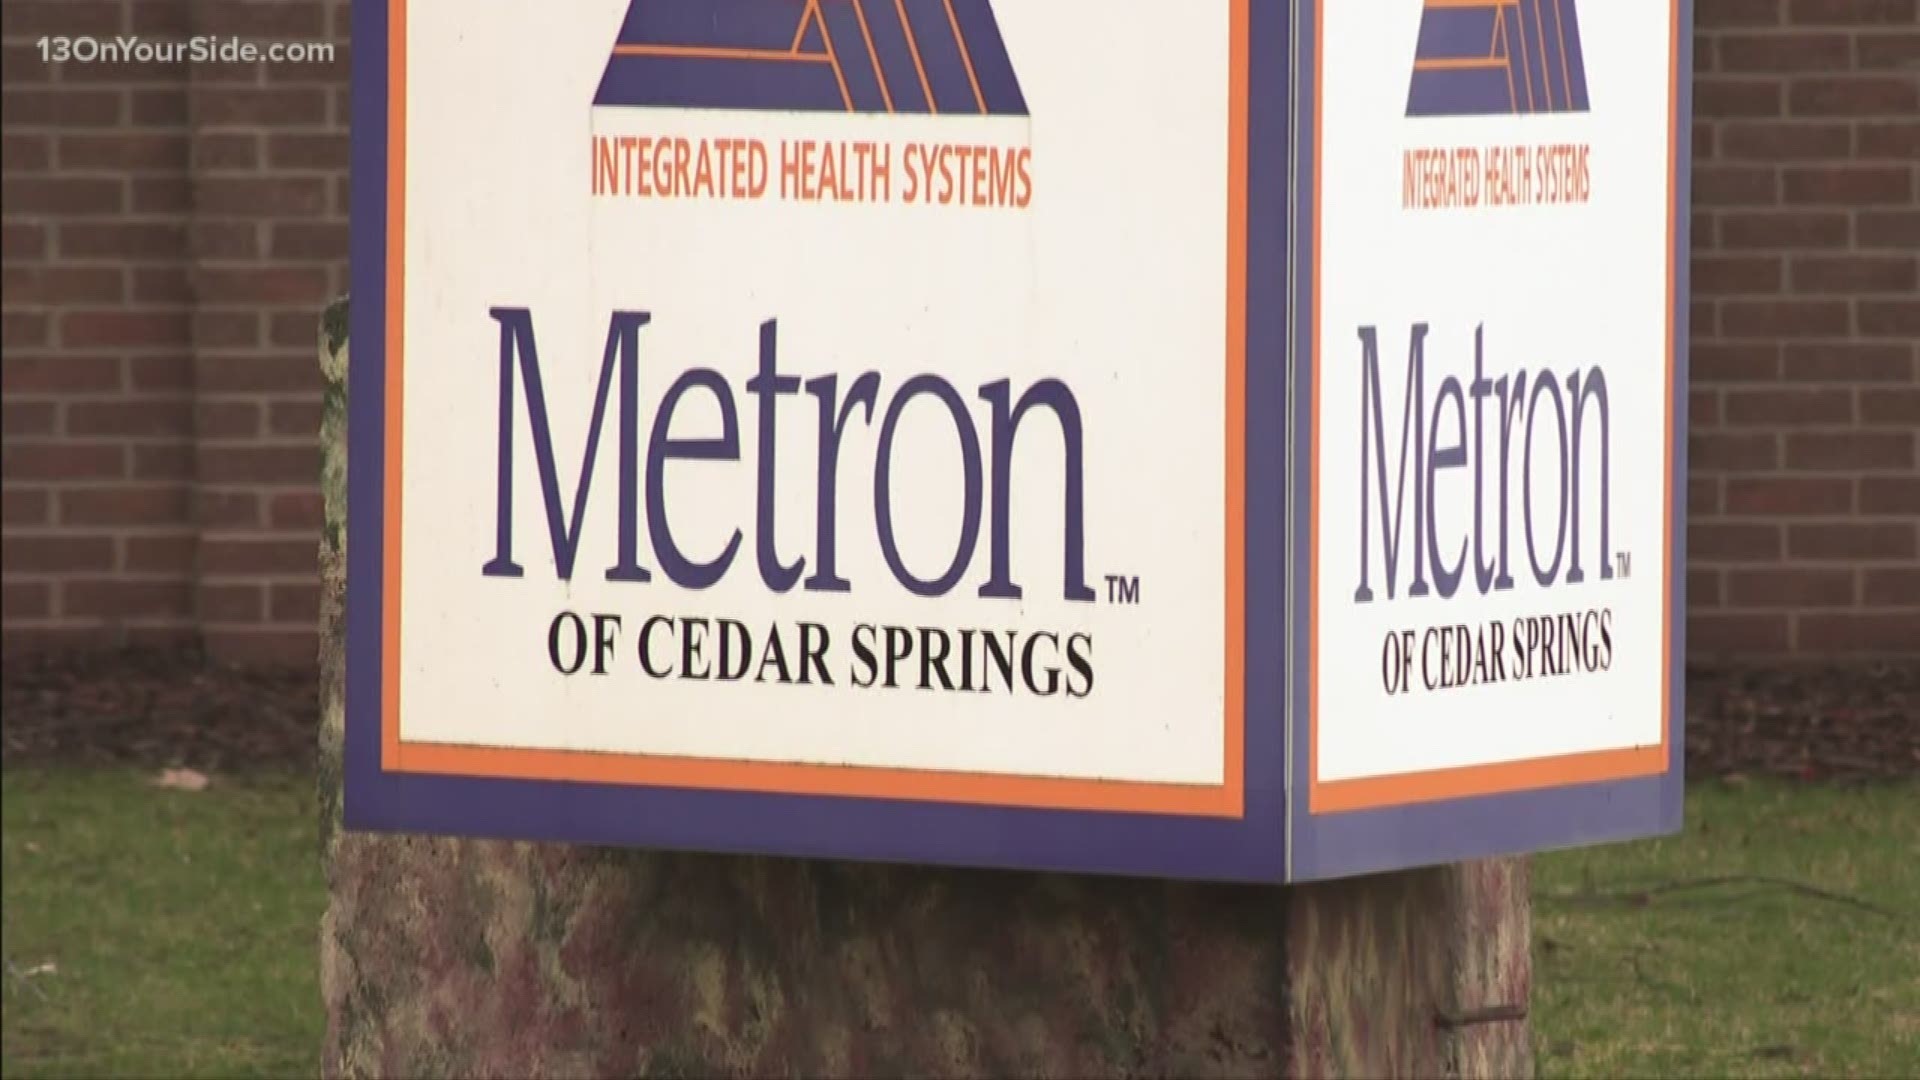 Metron said they have been working with local, state and federal health officials to address the breakout of the virus in the nursing home.